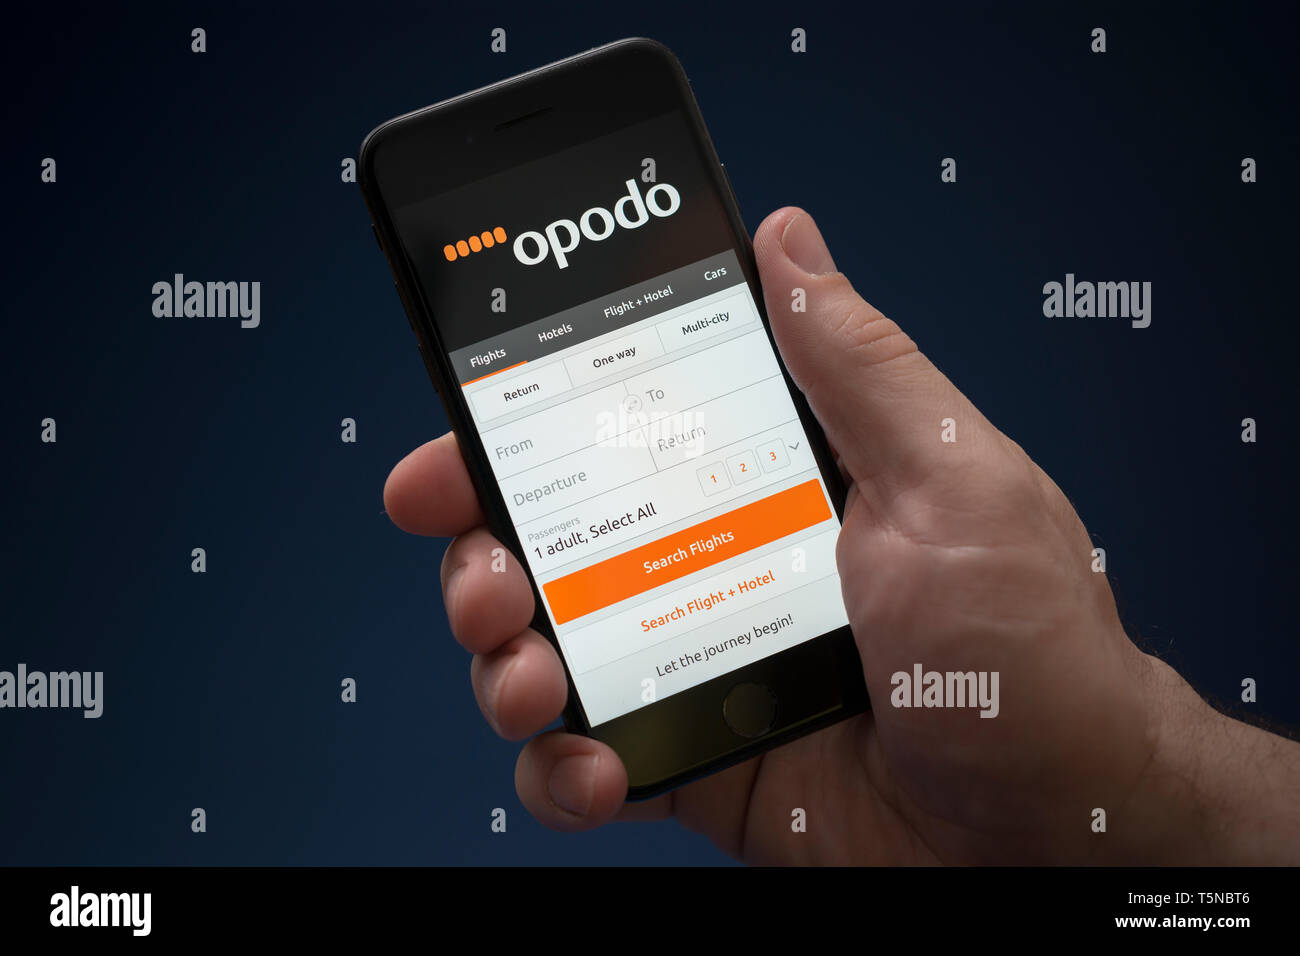 A man looks at his iPhone which displays the Opodo logo (Editorial use only). Stock Photo